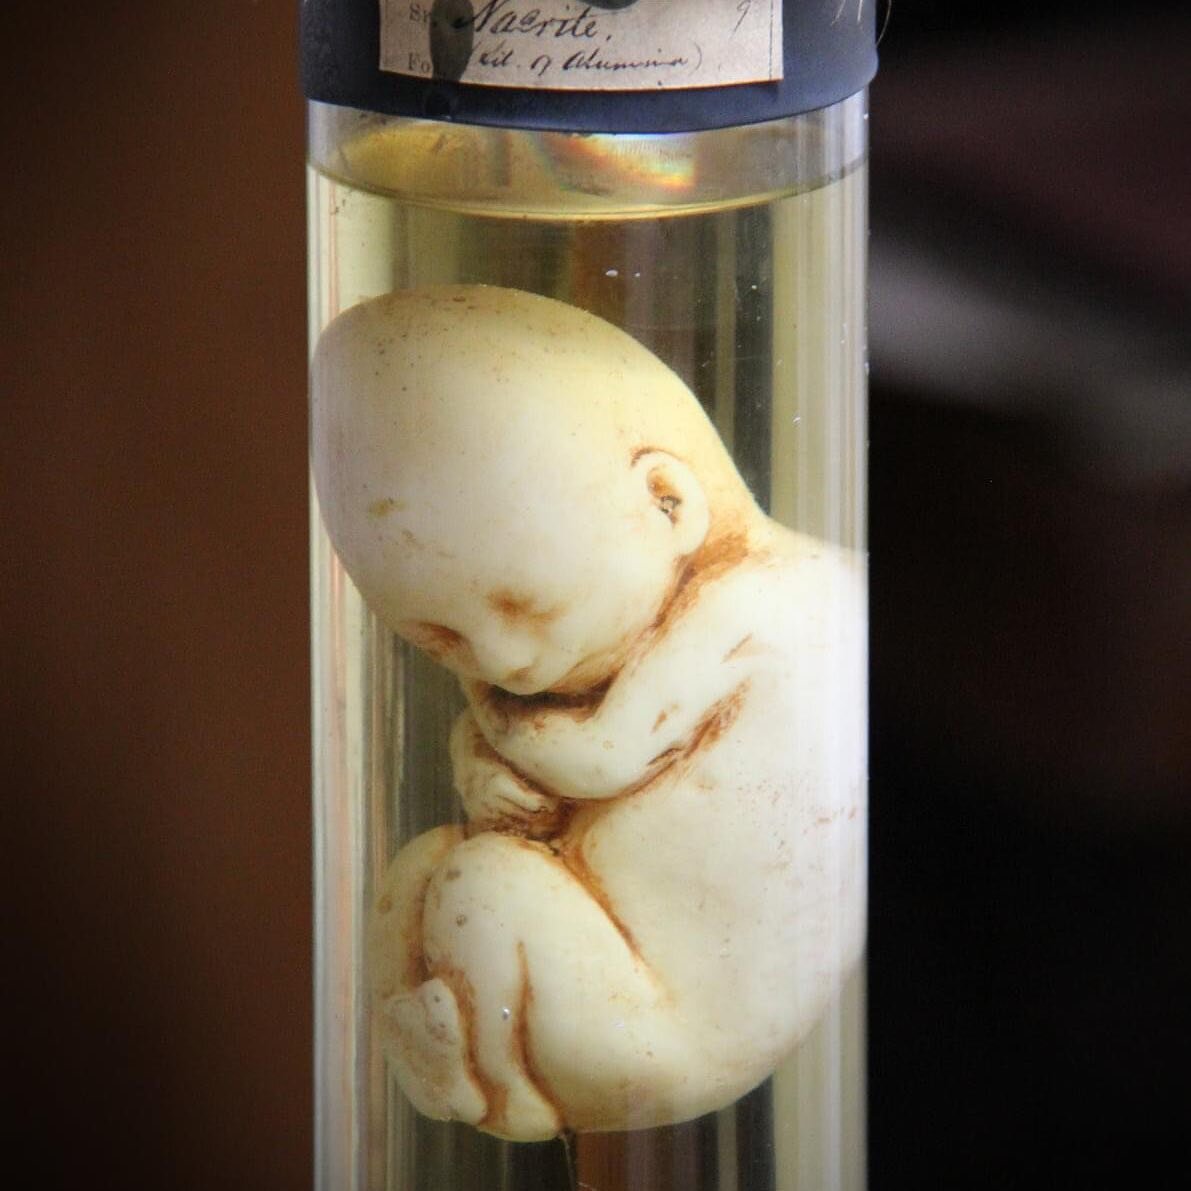 Being a father to 3 boys was enough, so when the 4th came along I had to pickle him. #pickledpunk #oddities #odditiesandcuriosities #huntarianmuseum #fetus #bizarremagictrick #halloweendecor #horrorprops